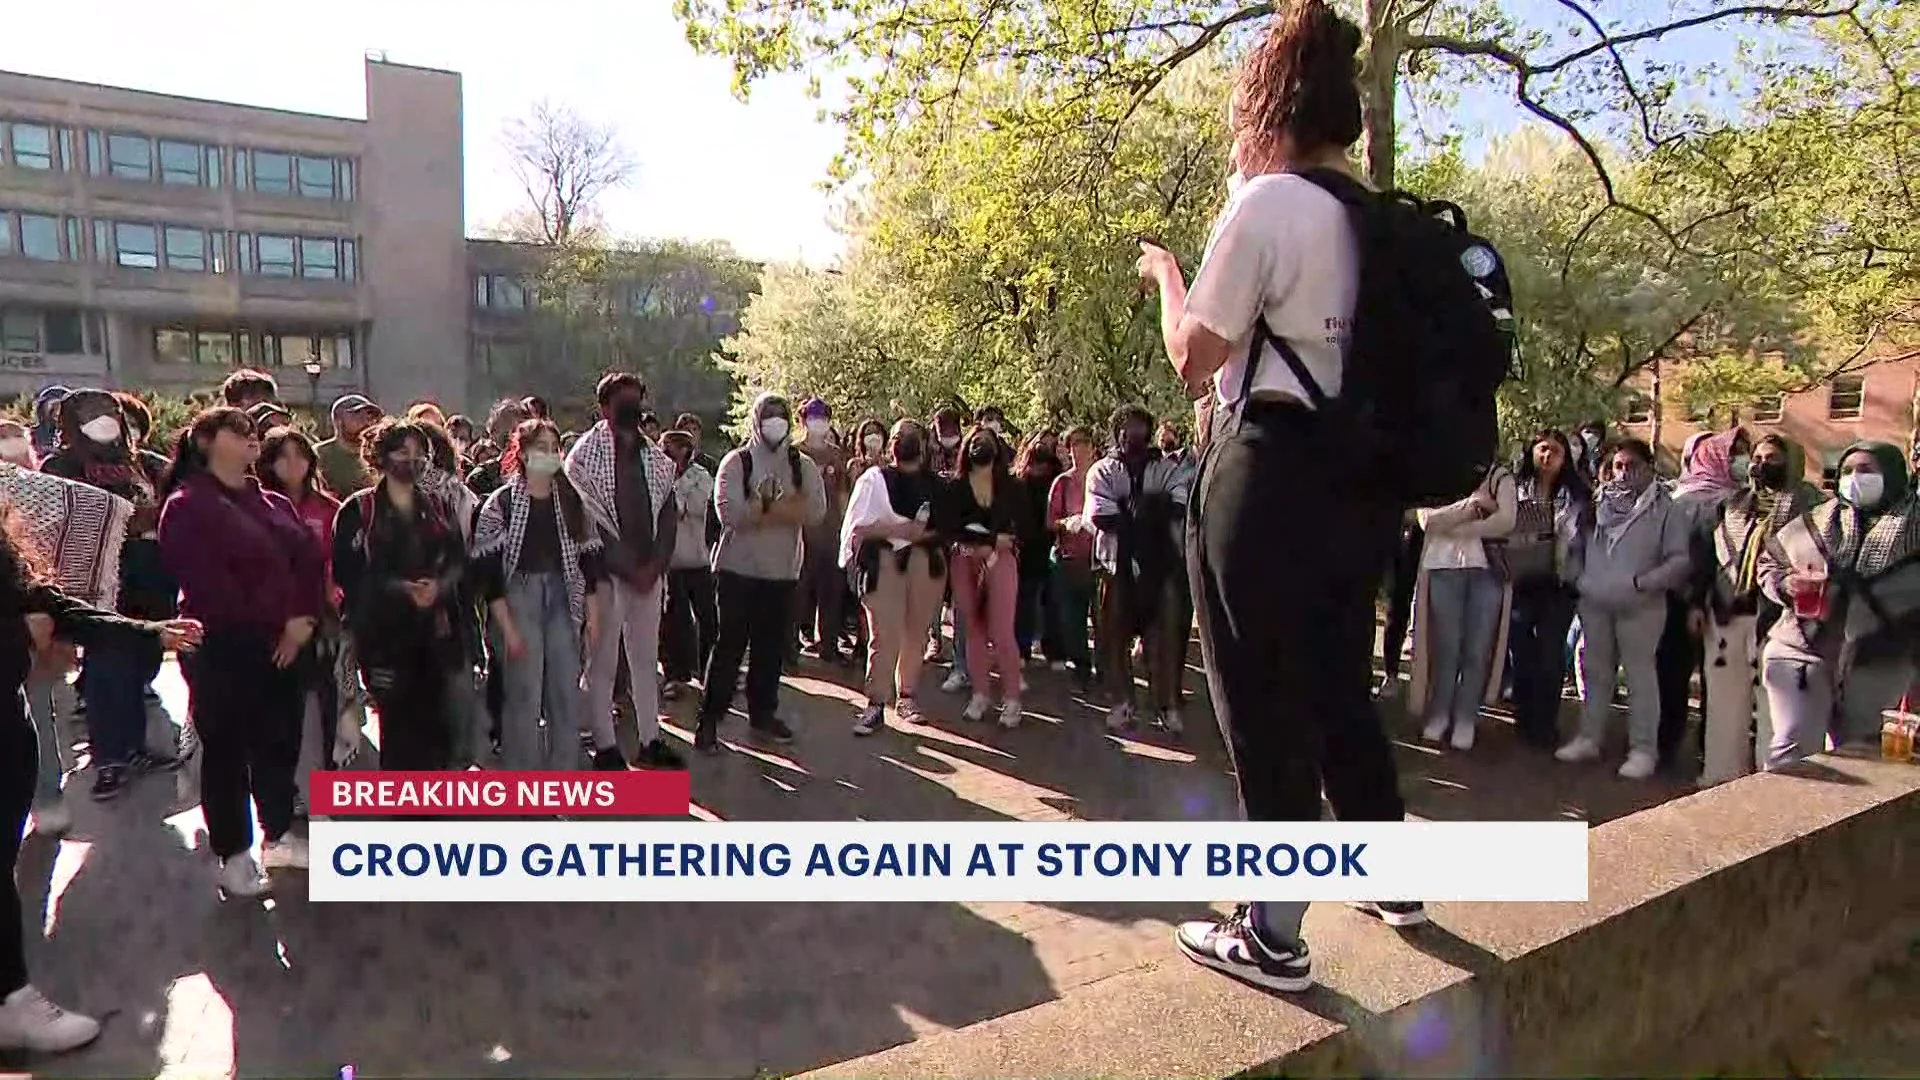 Stony Brook University officials: 29 people arrested on campus as students hold pro-Palestinian protest